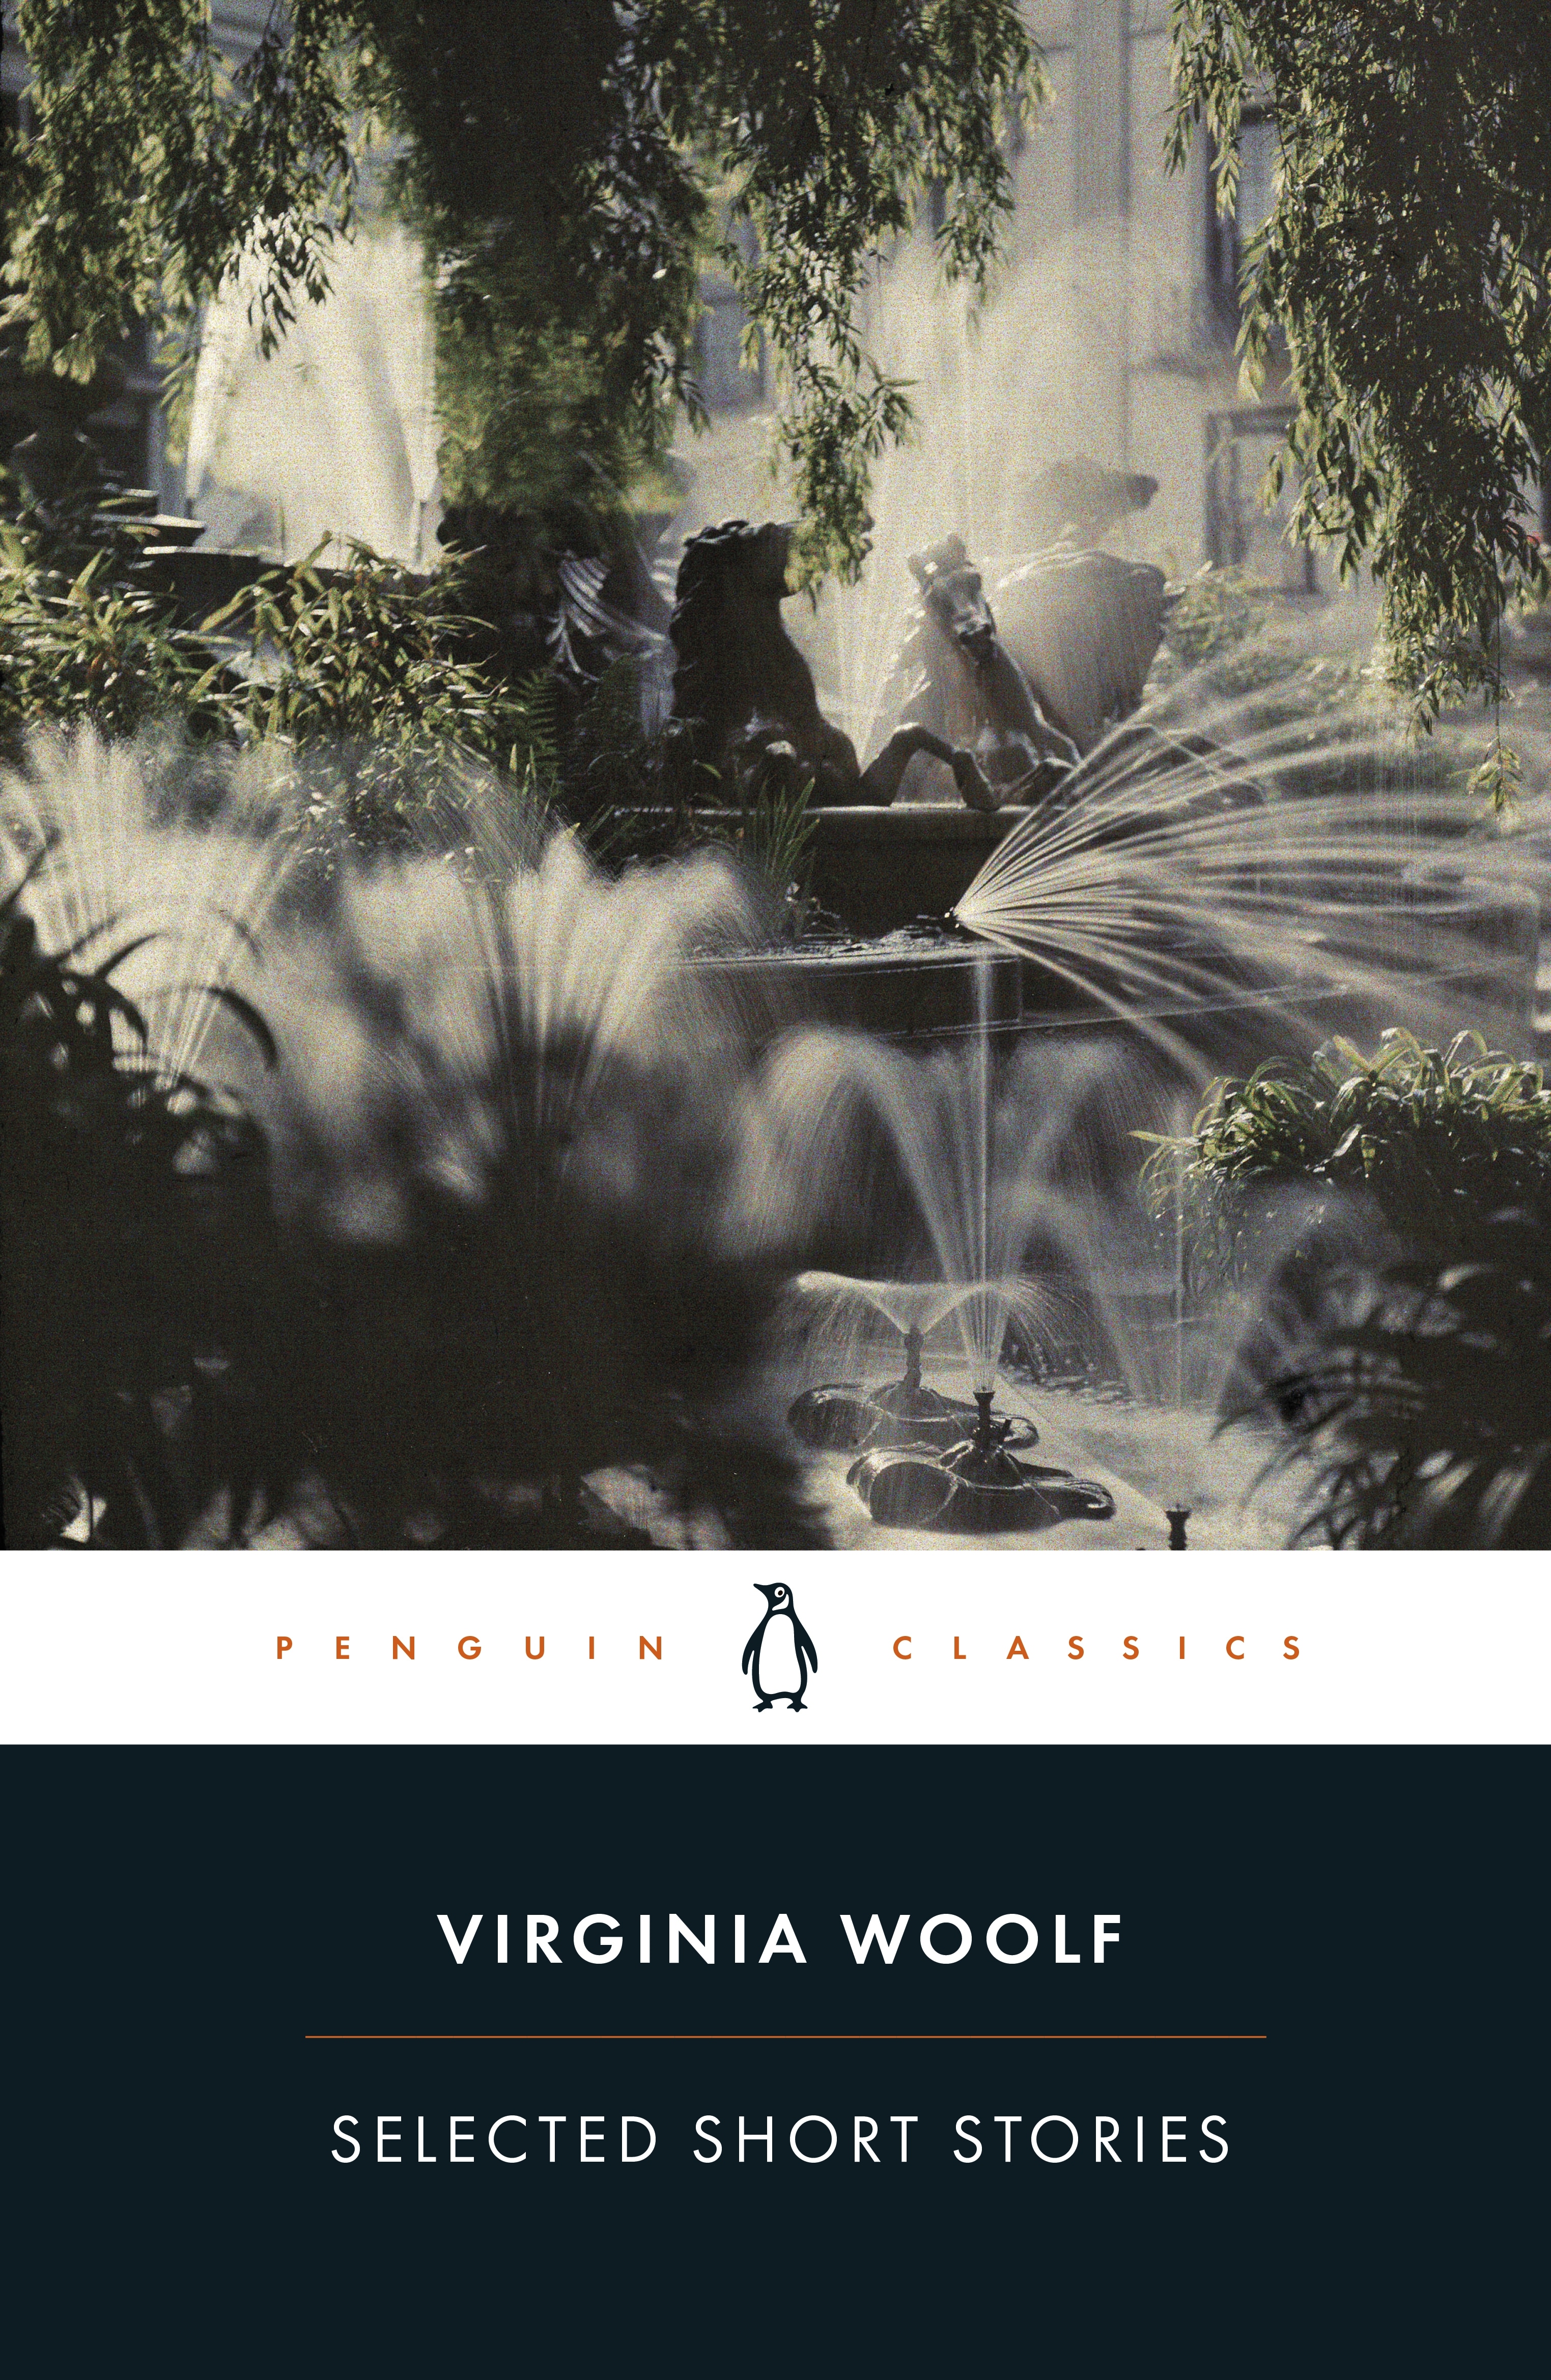 Book “Selected Short Stories” by Virginia Woolf — May 2, 2019